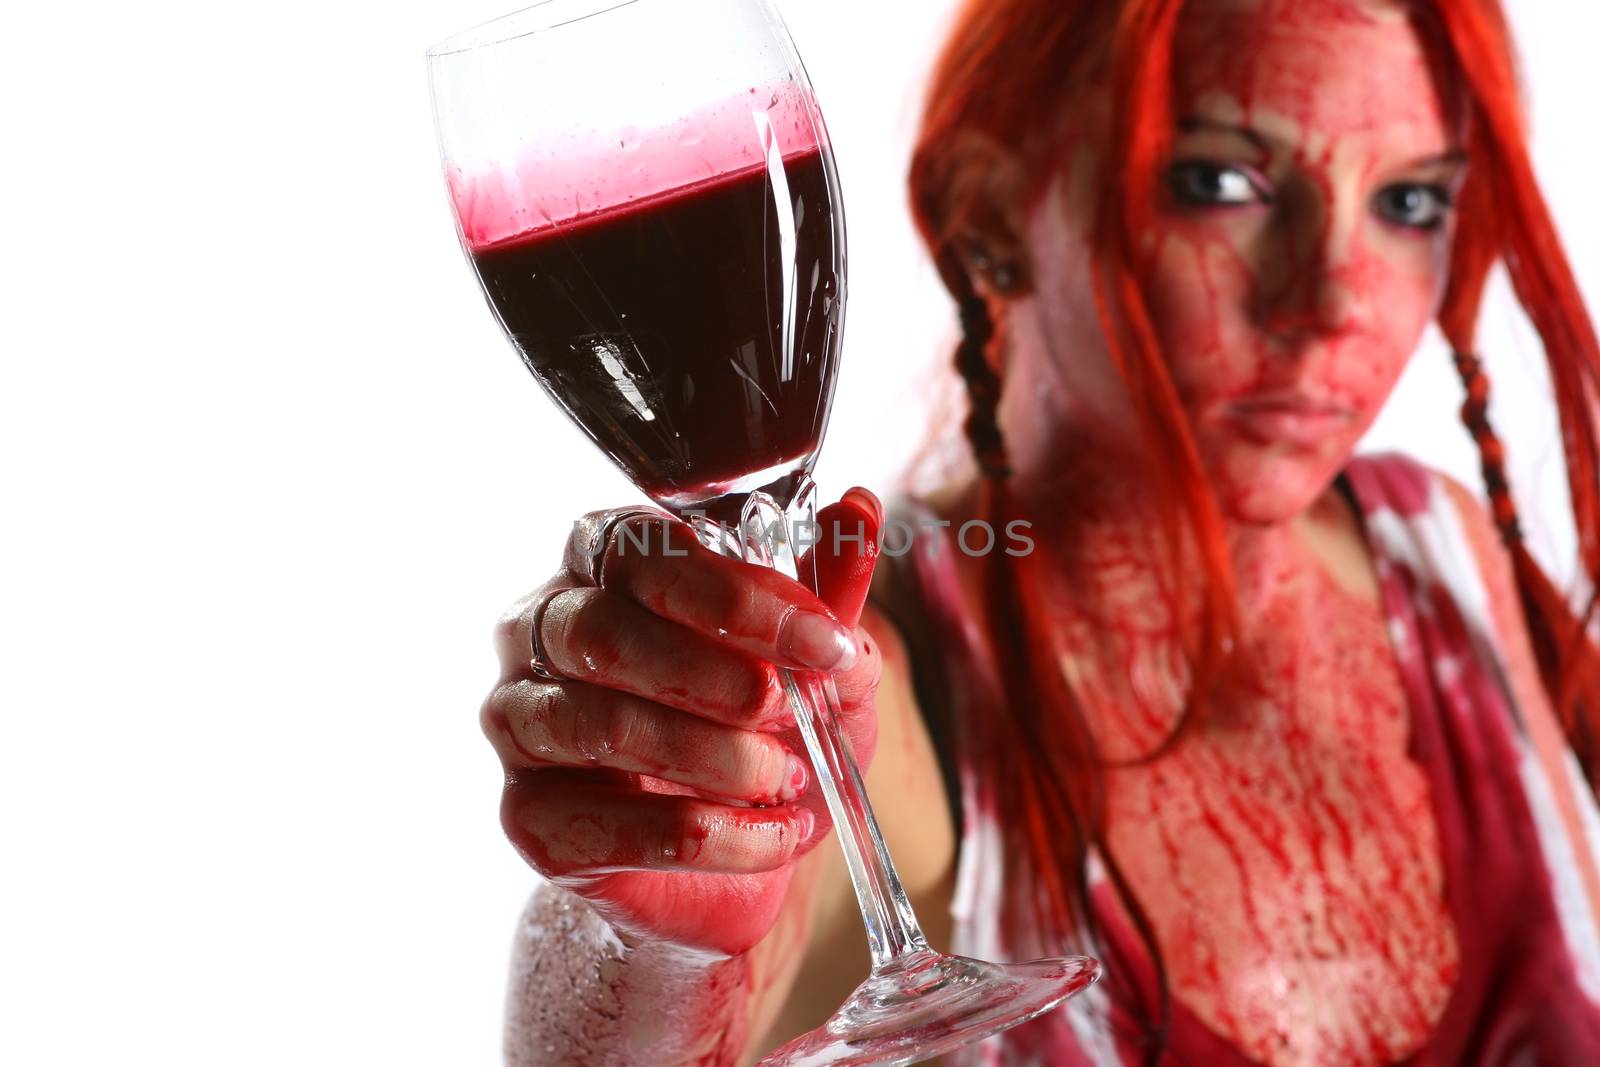 Beautiful red hair girl covered in blood